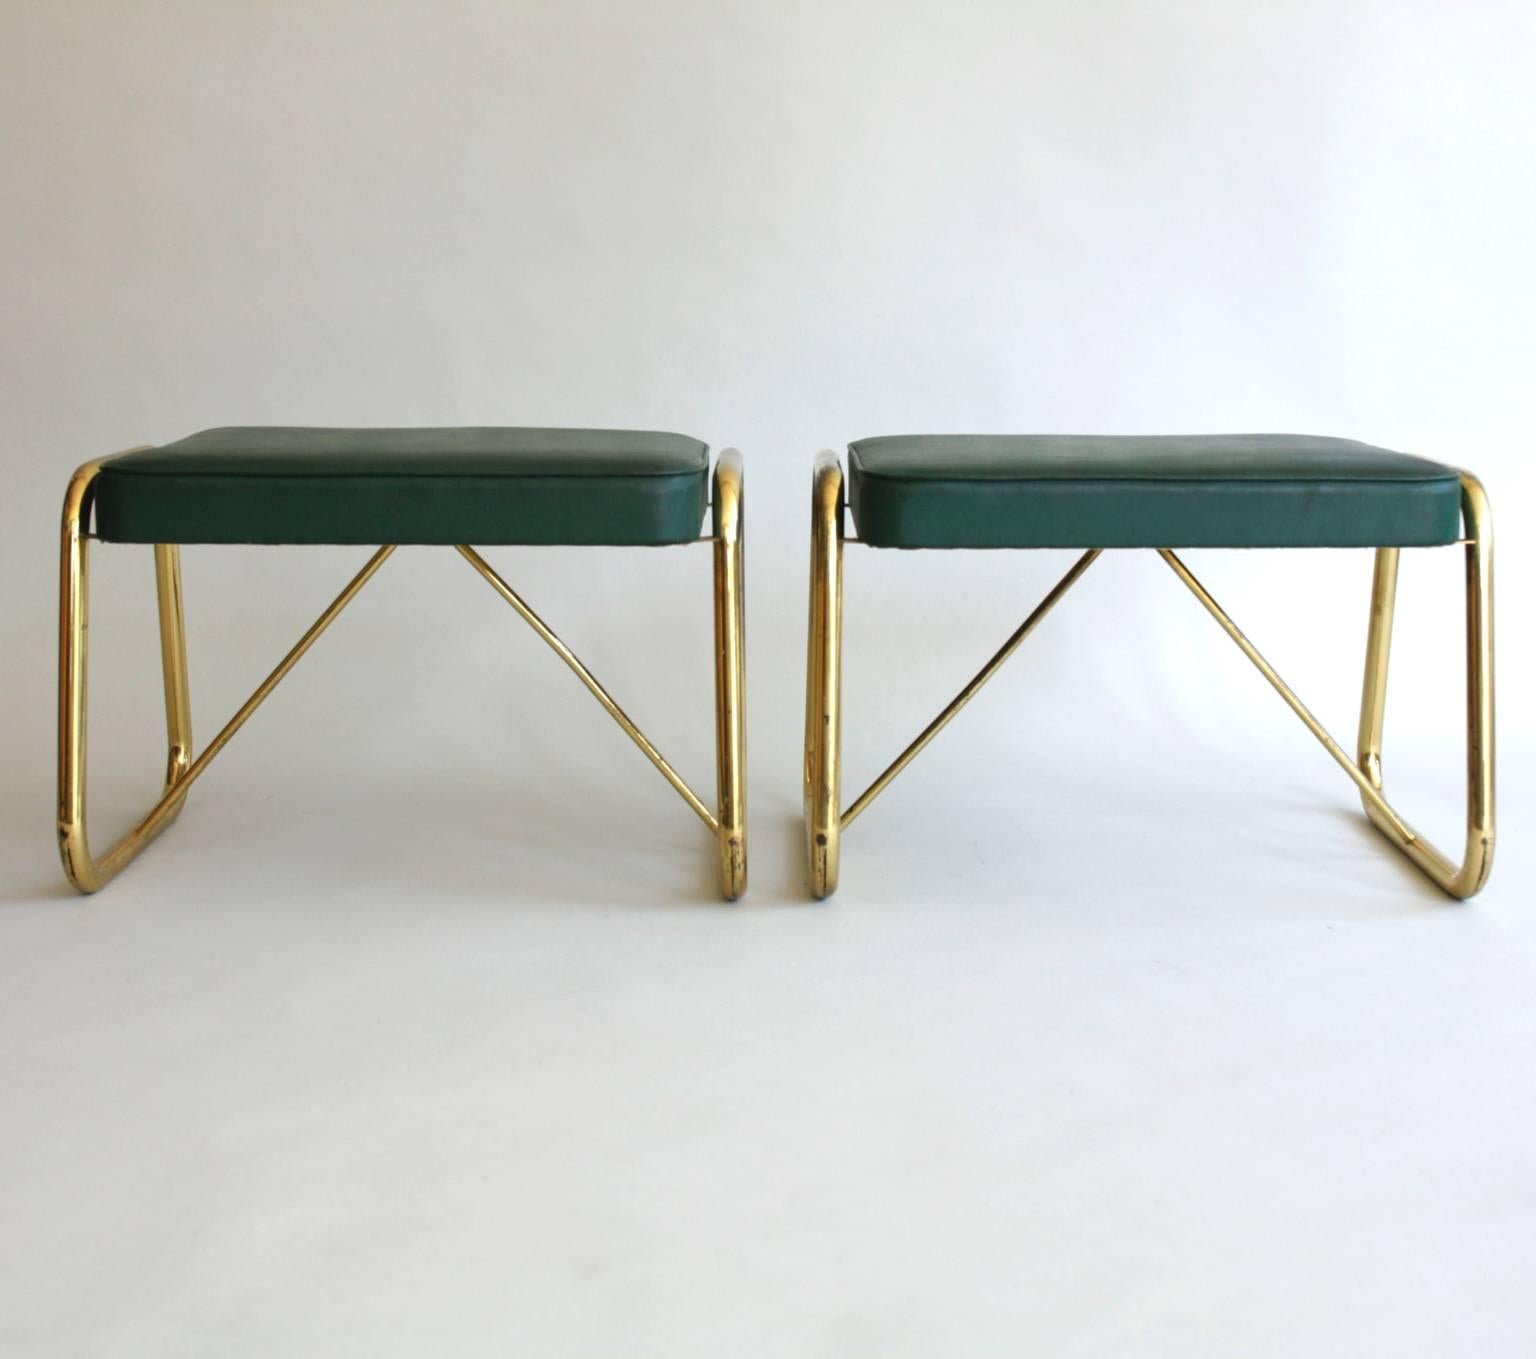 Pair of 1950s Italian Footstools or Ottomans, Brass and Green (Moderne der Mitte des Jahrhunderts)